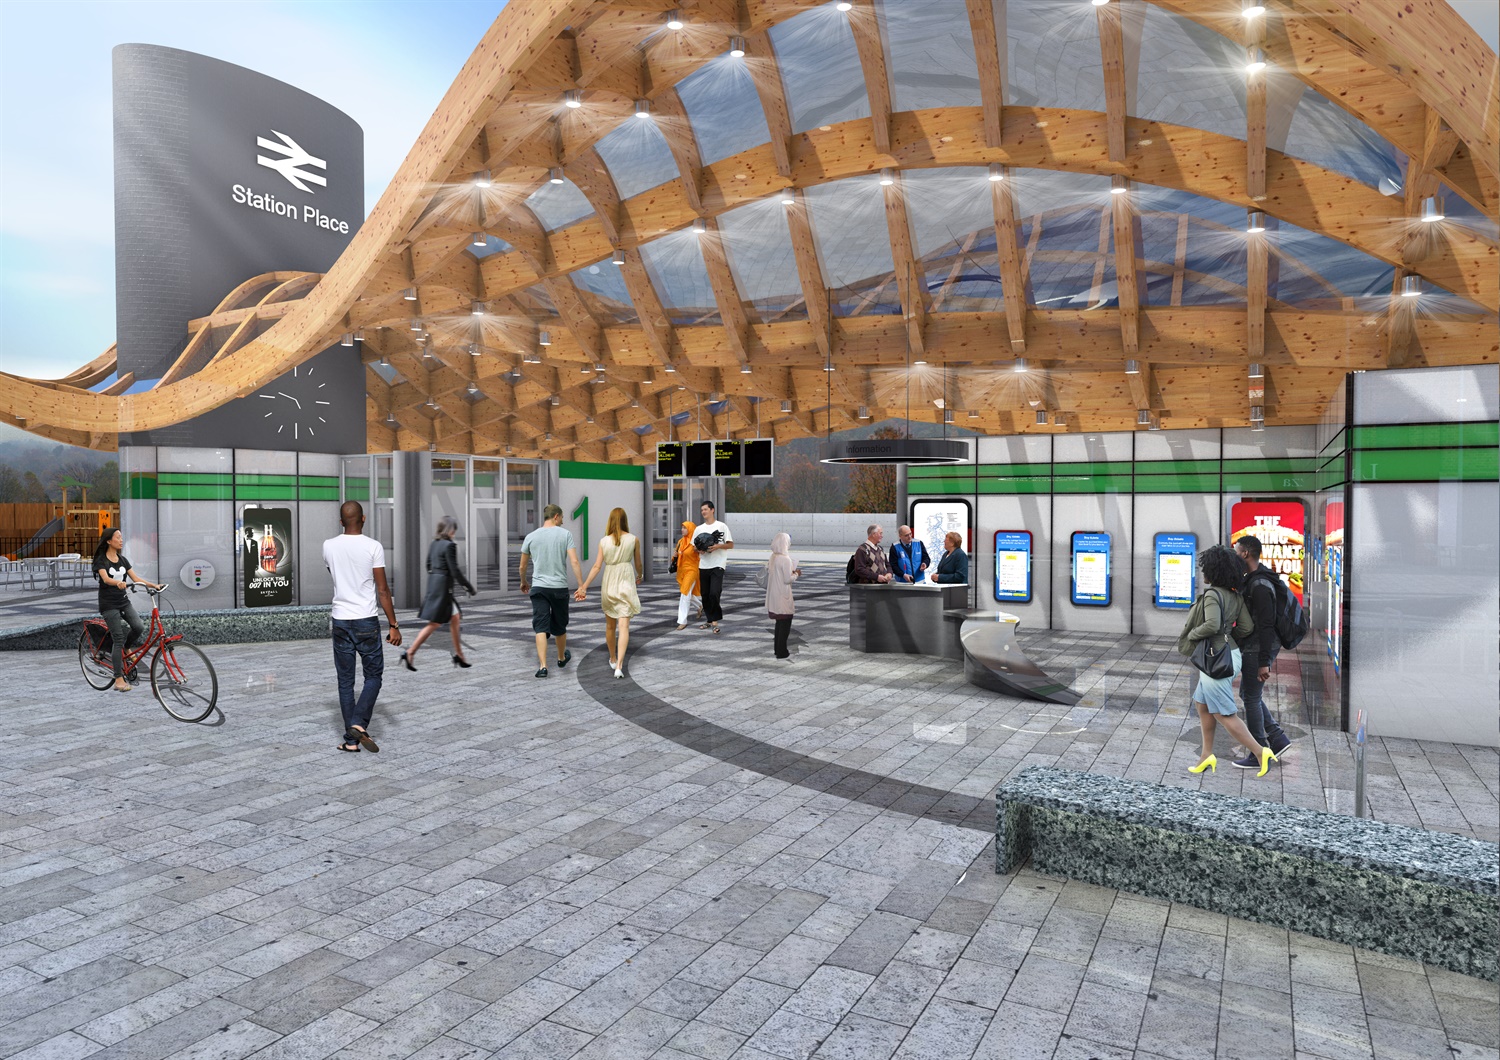 Could this be the station of the future?